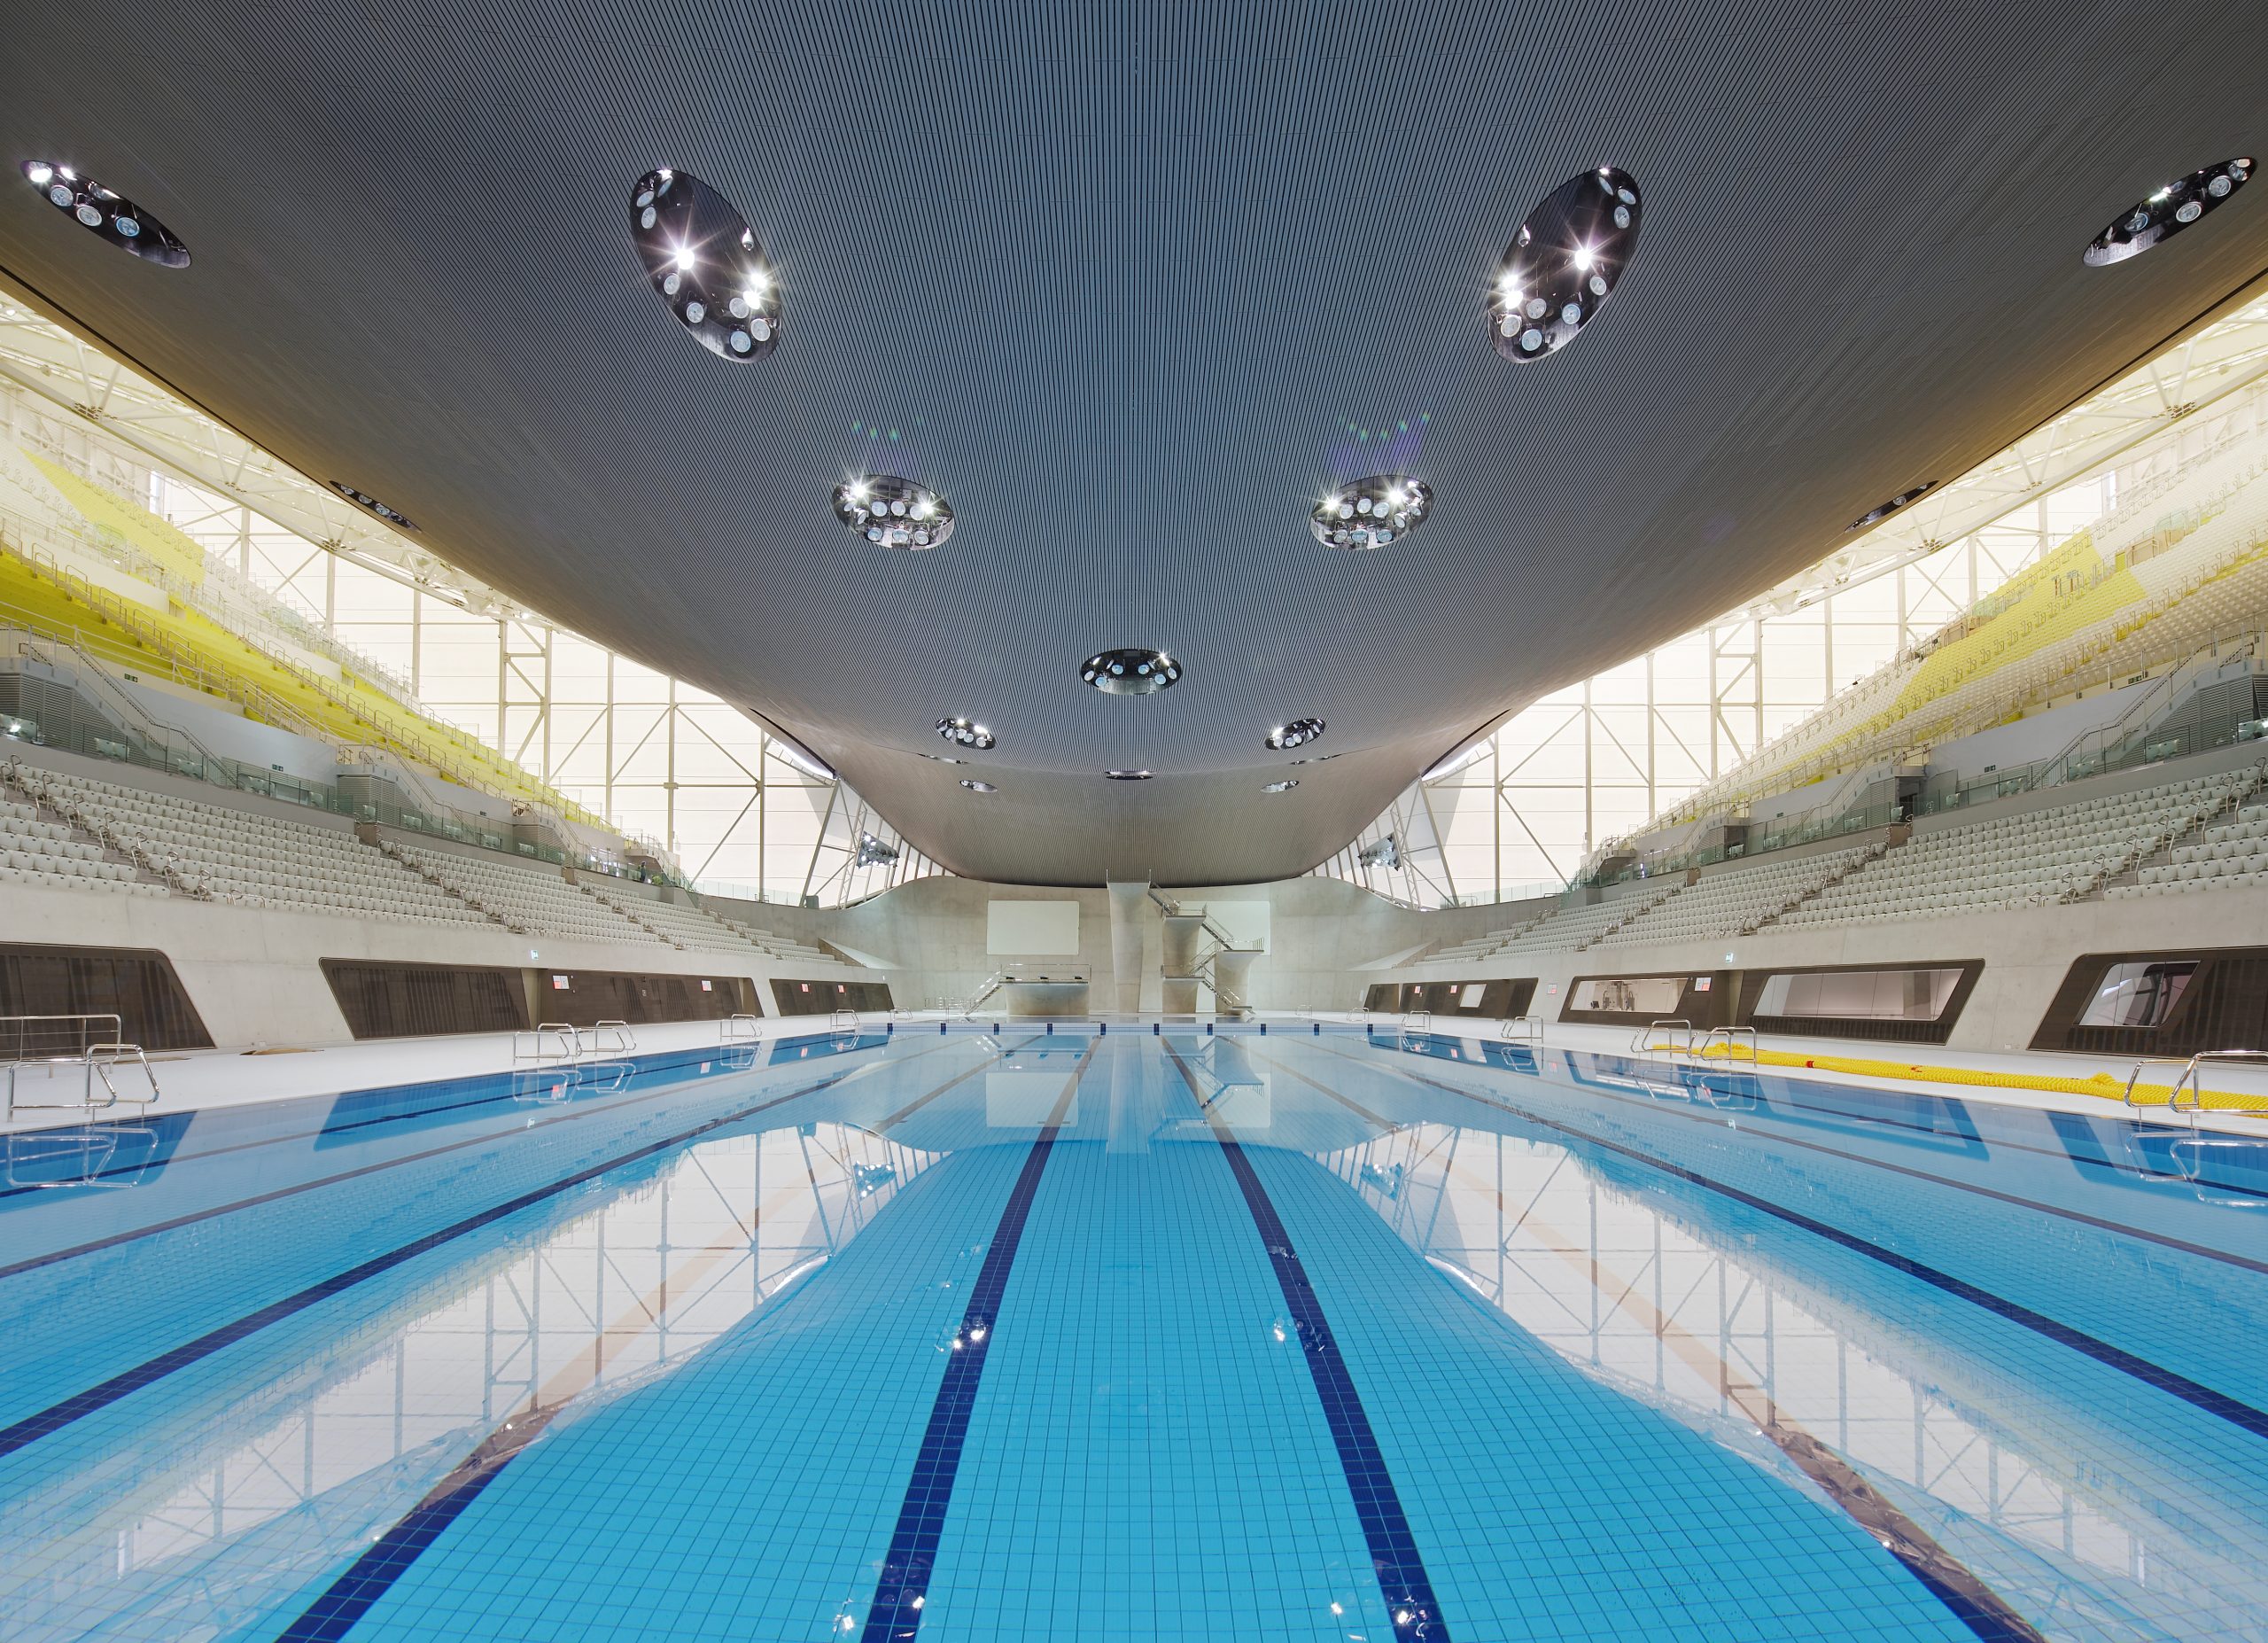 The photographers Hufton + Crow own the copyright of these images of the London Aquatics Centre by Zaha Hadid Architects.